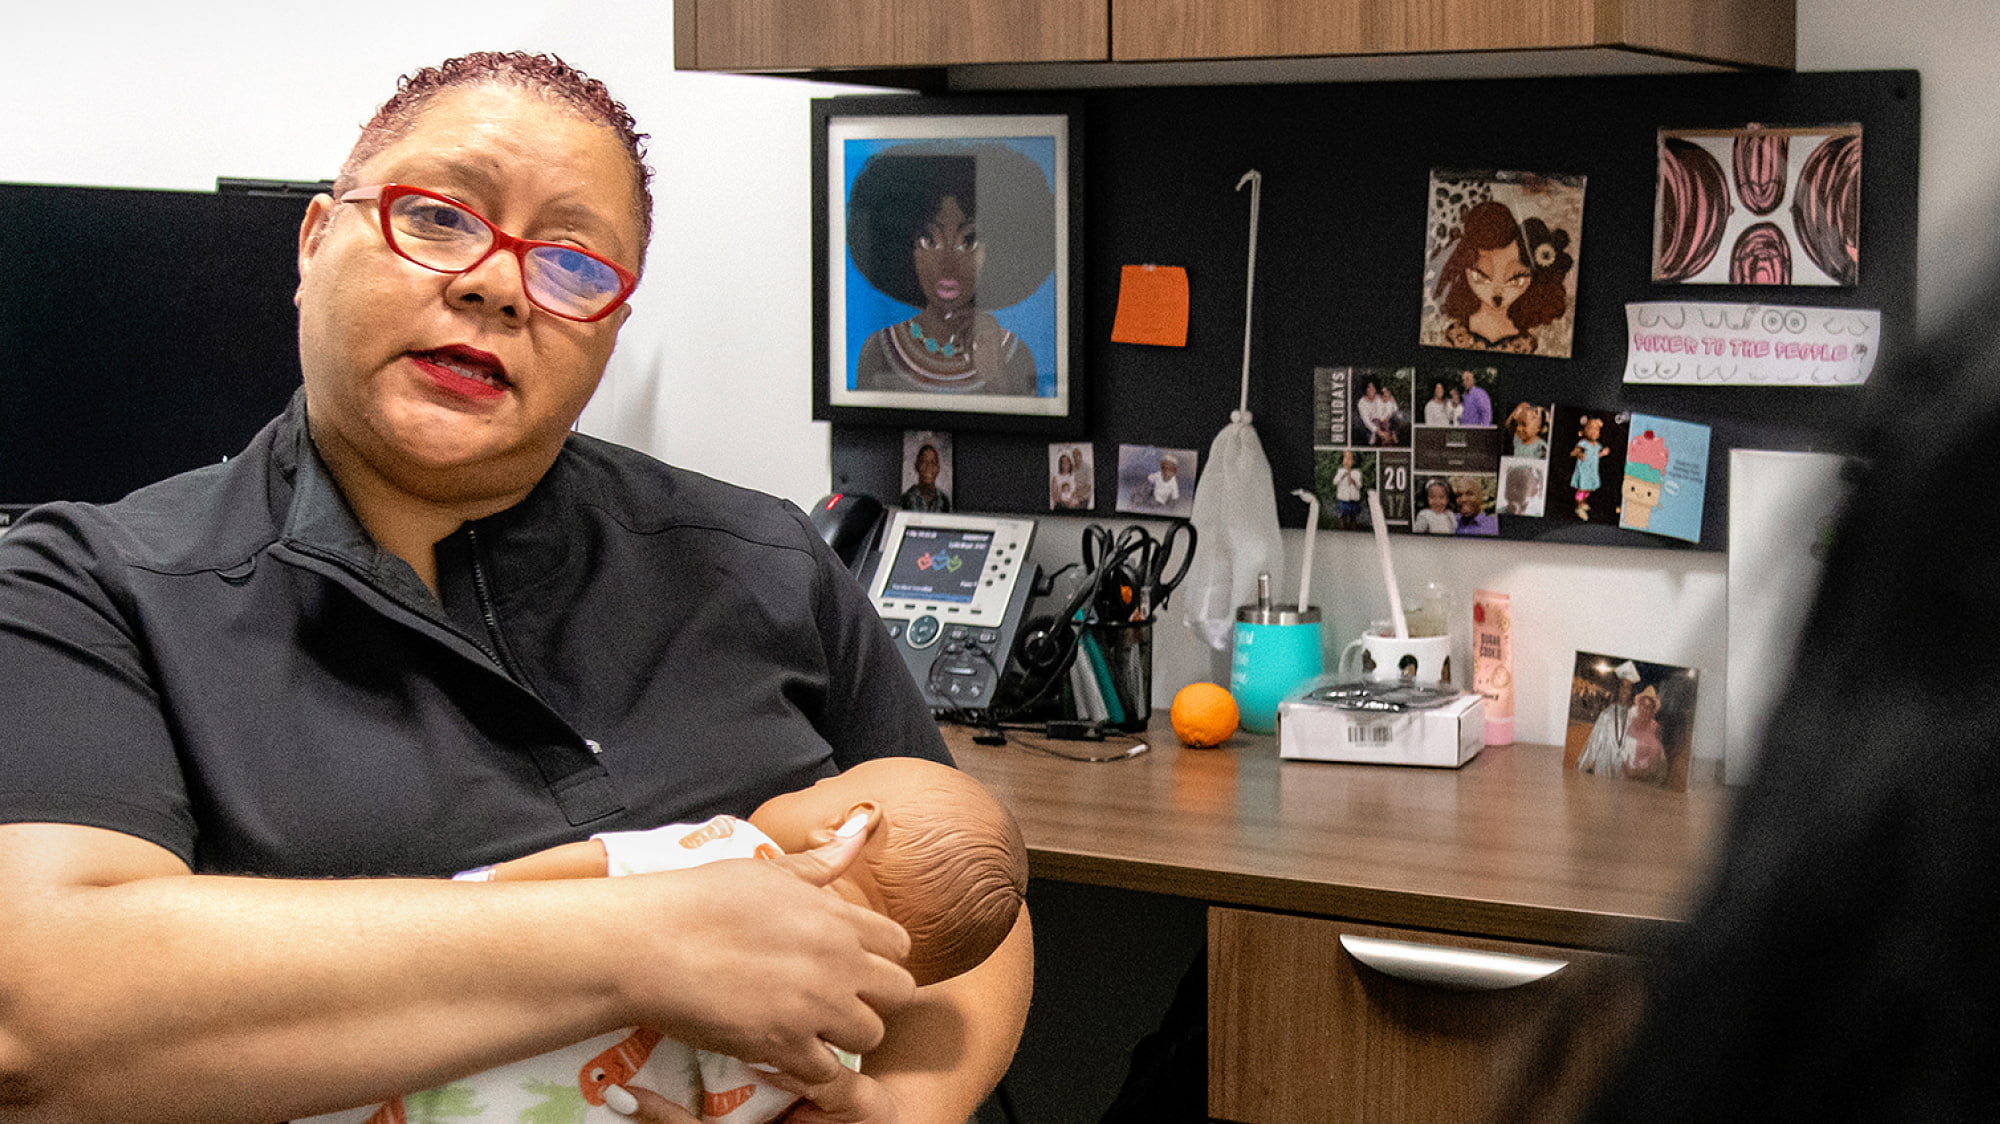 Lydia Boyd holding a prop baby in her lap in front of her desk